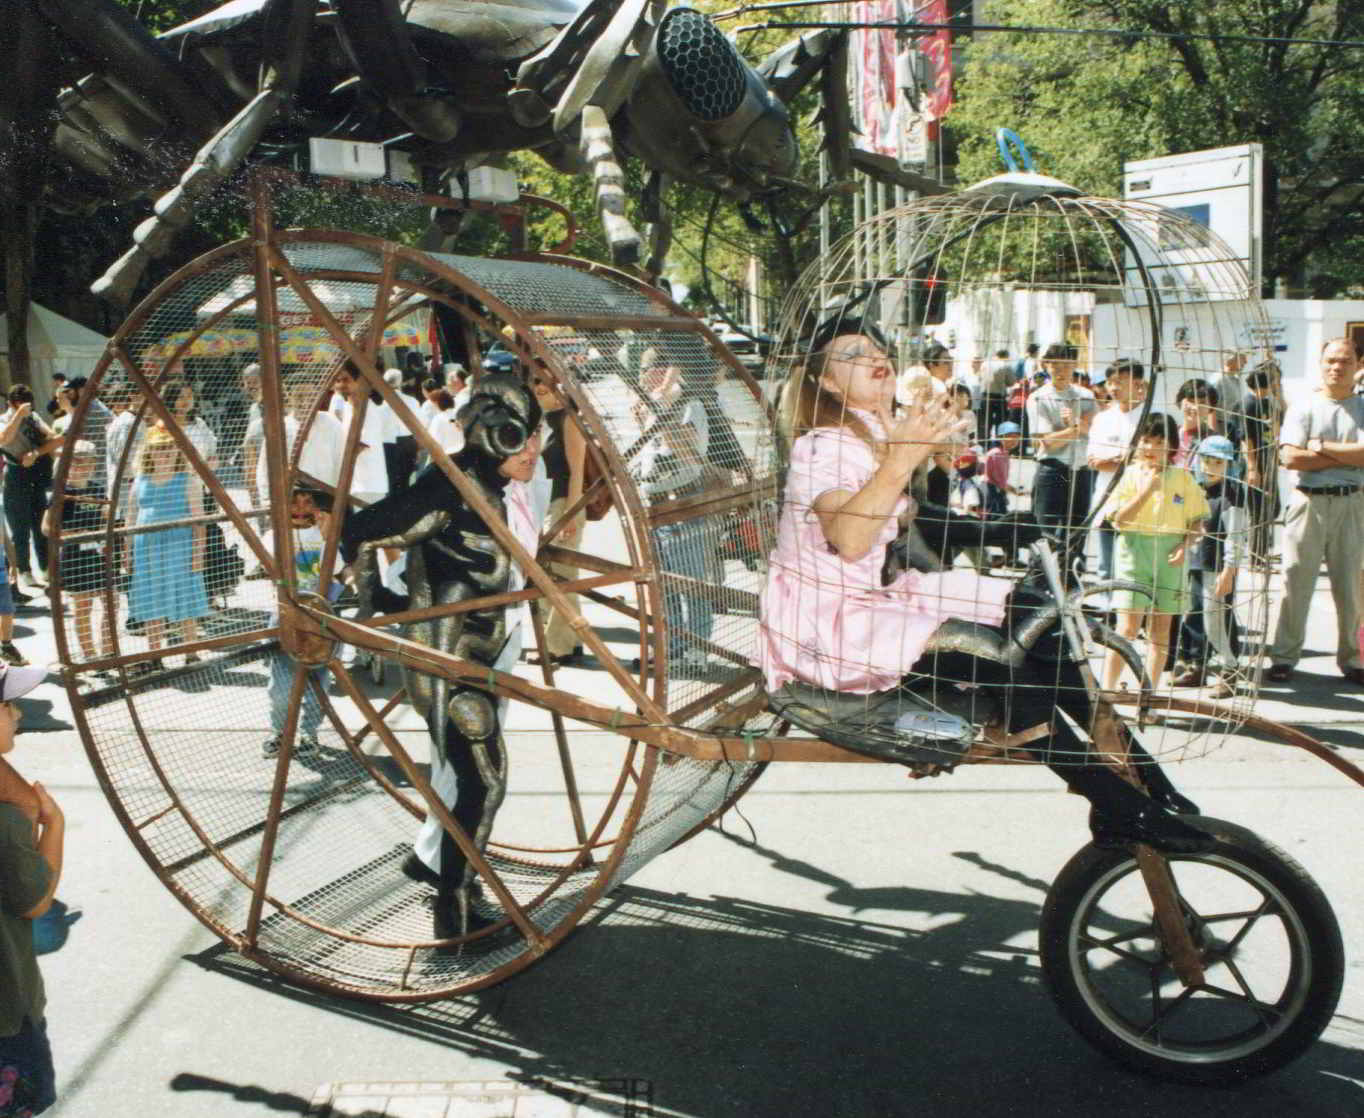 Road Roach side view of parade contraption showing wheel and first cage